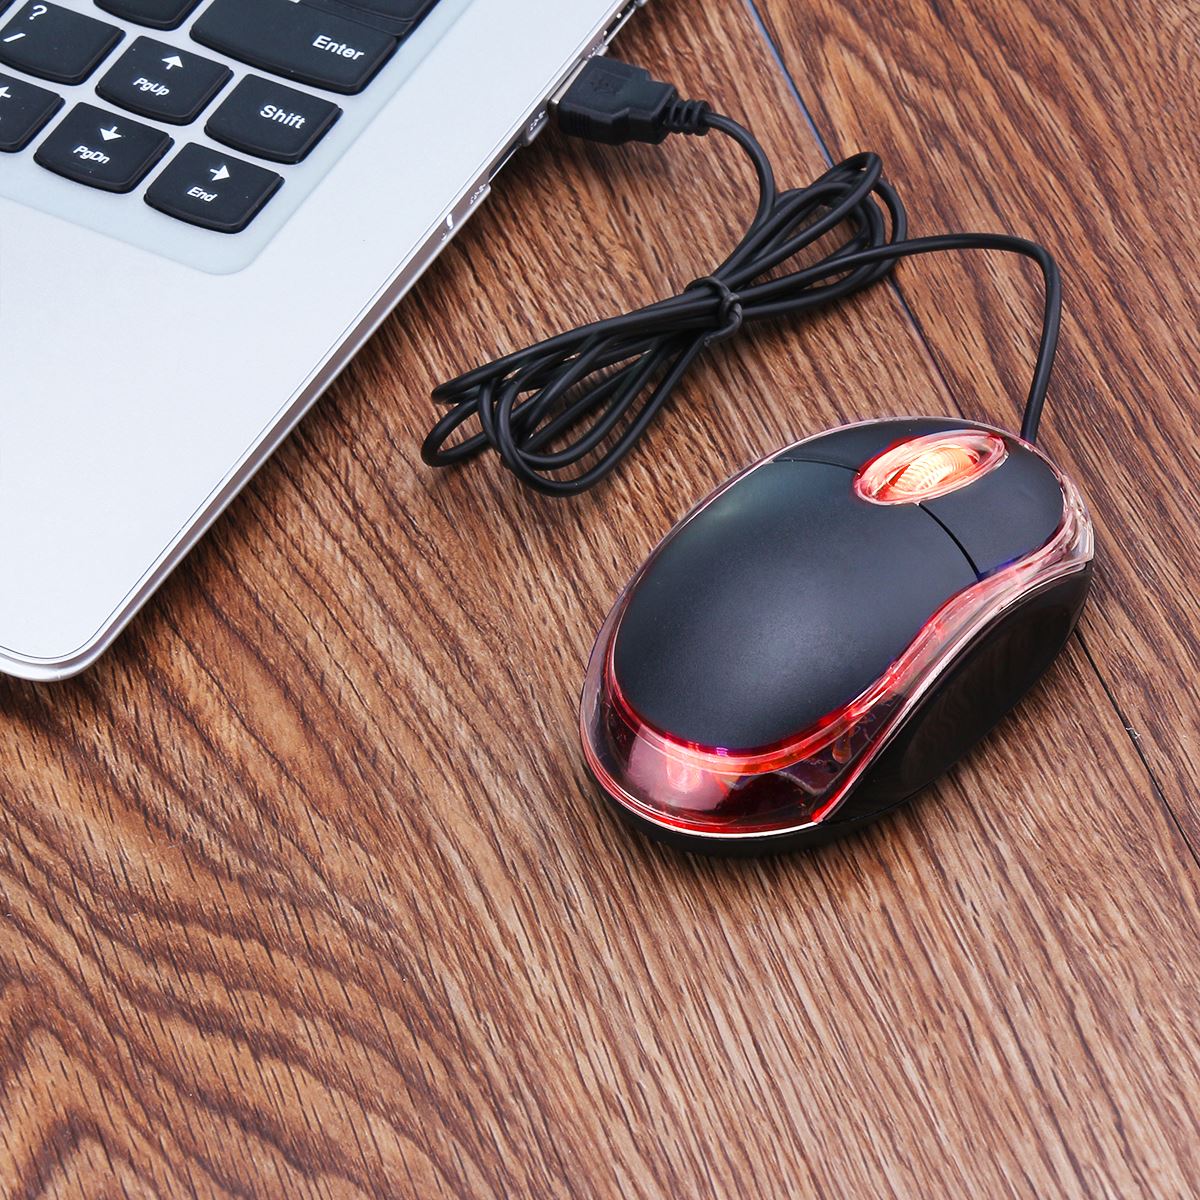 Ranking of the best computer mice for work in 2022